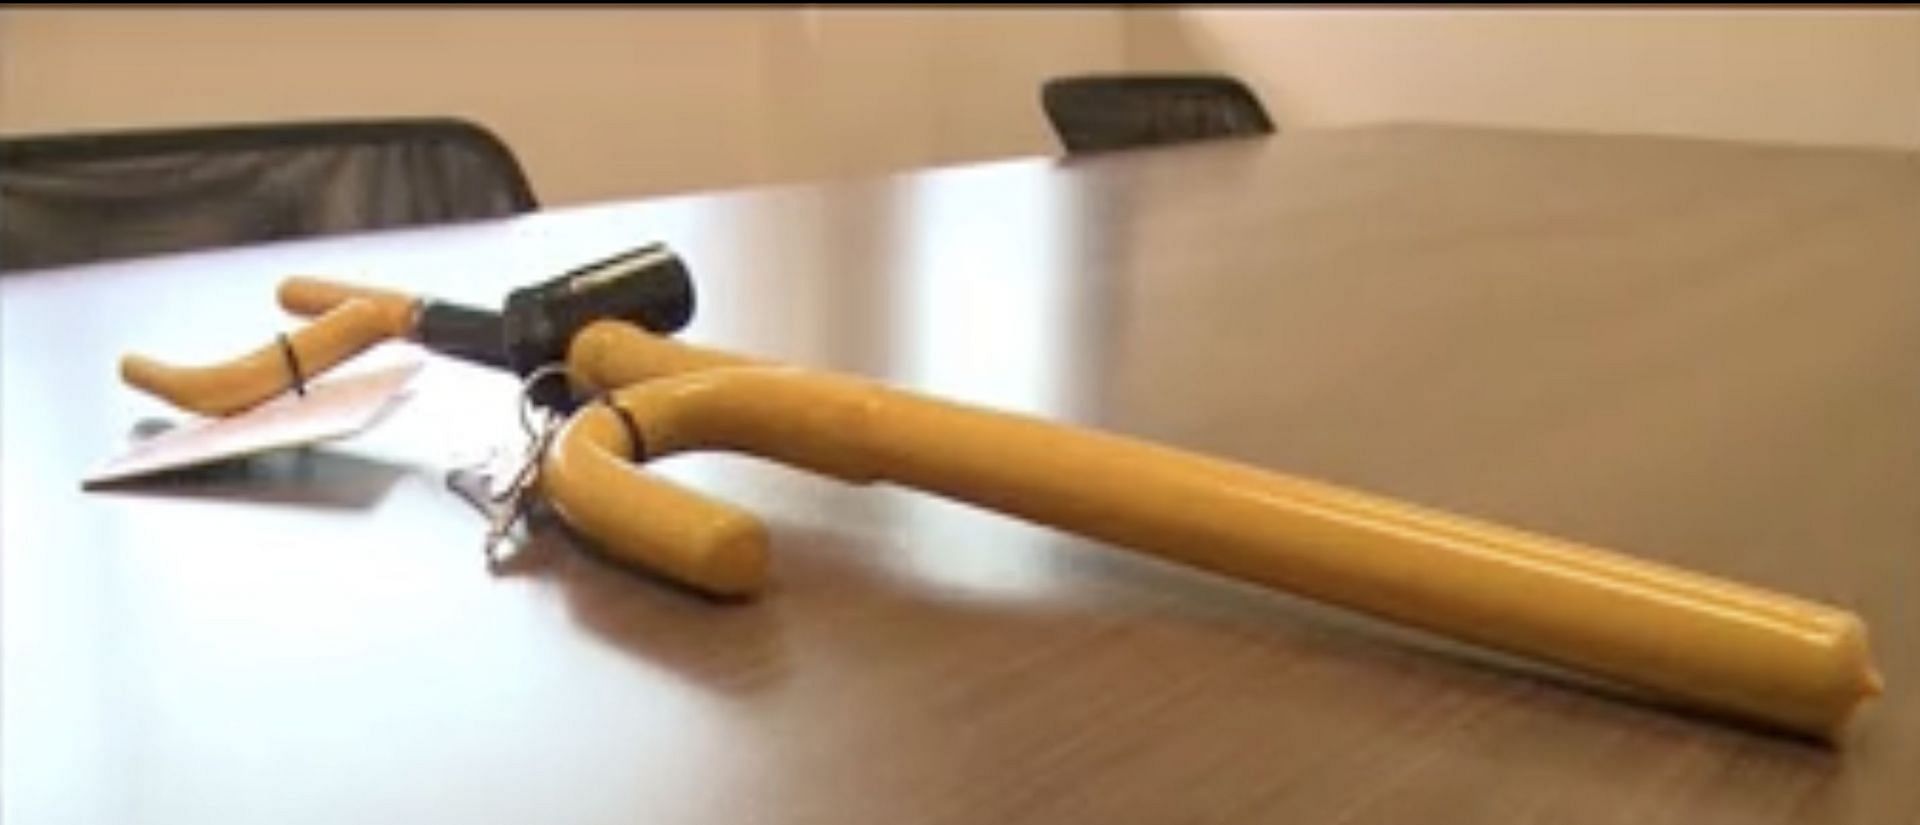 The Maywood Police Department gives away steering protectors that help with anti-theft. (image via Fox 32 News)